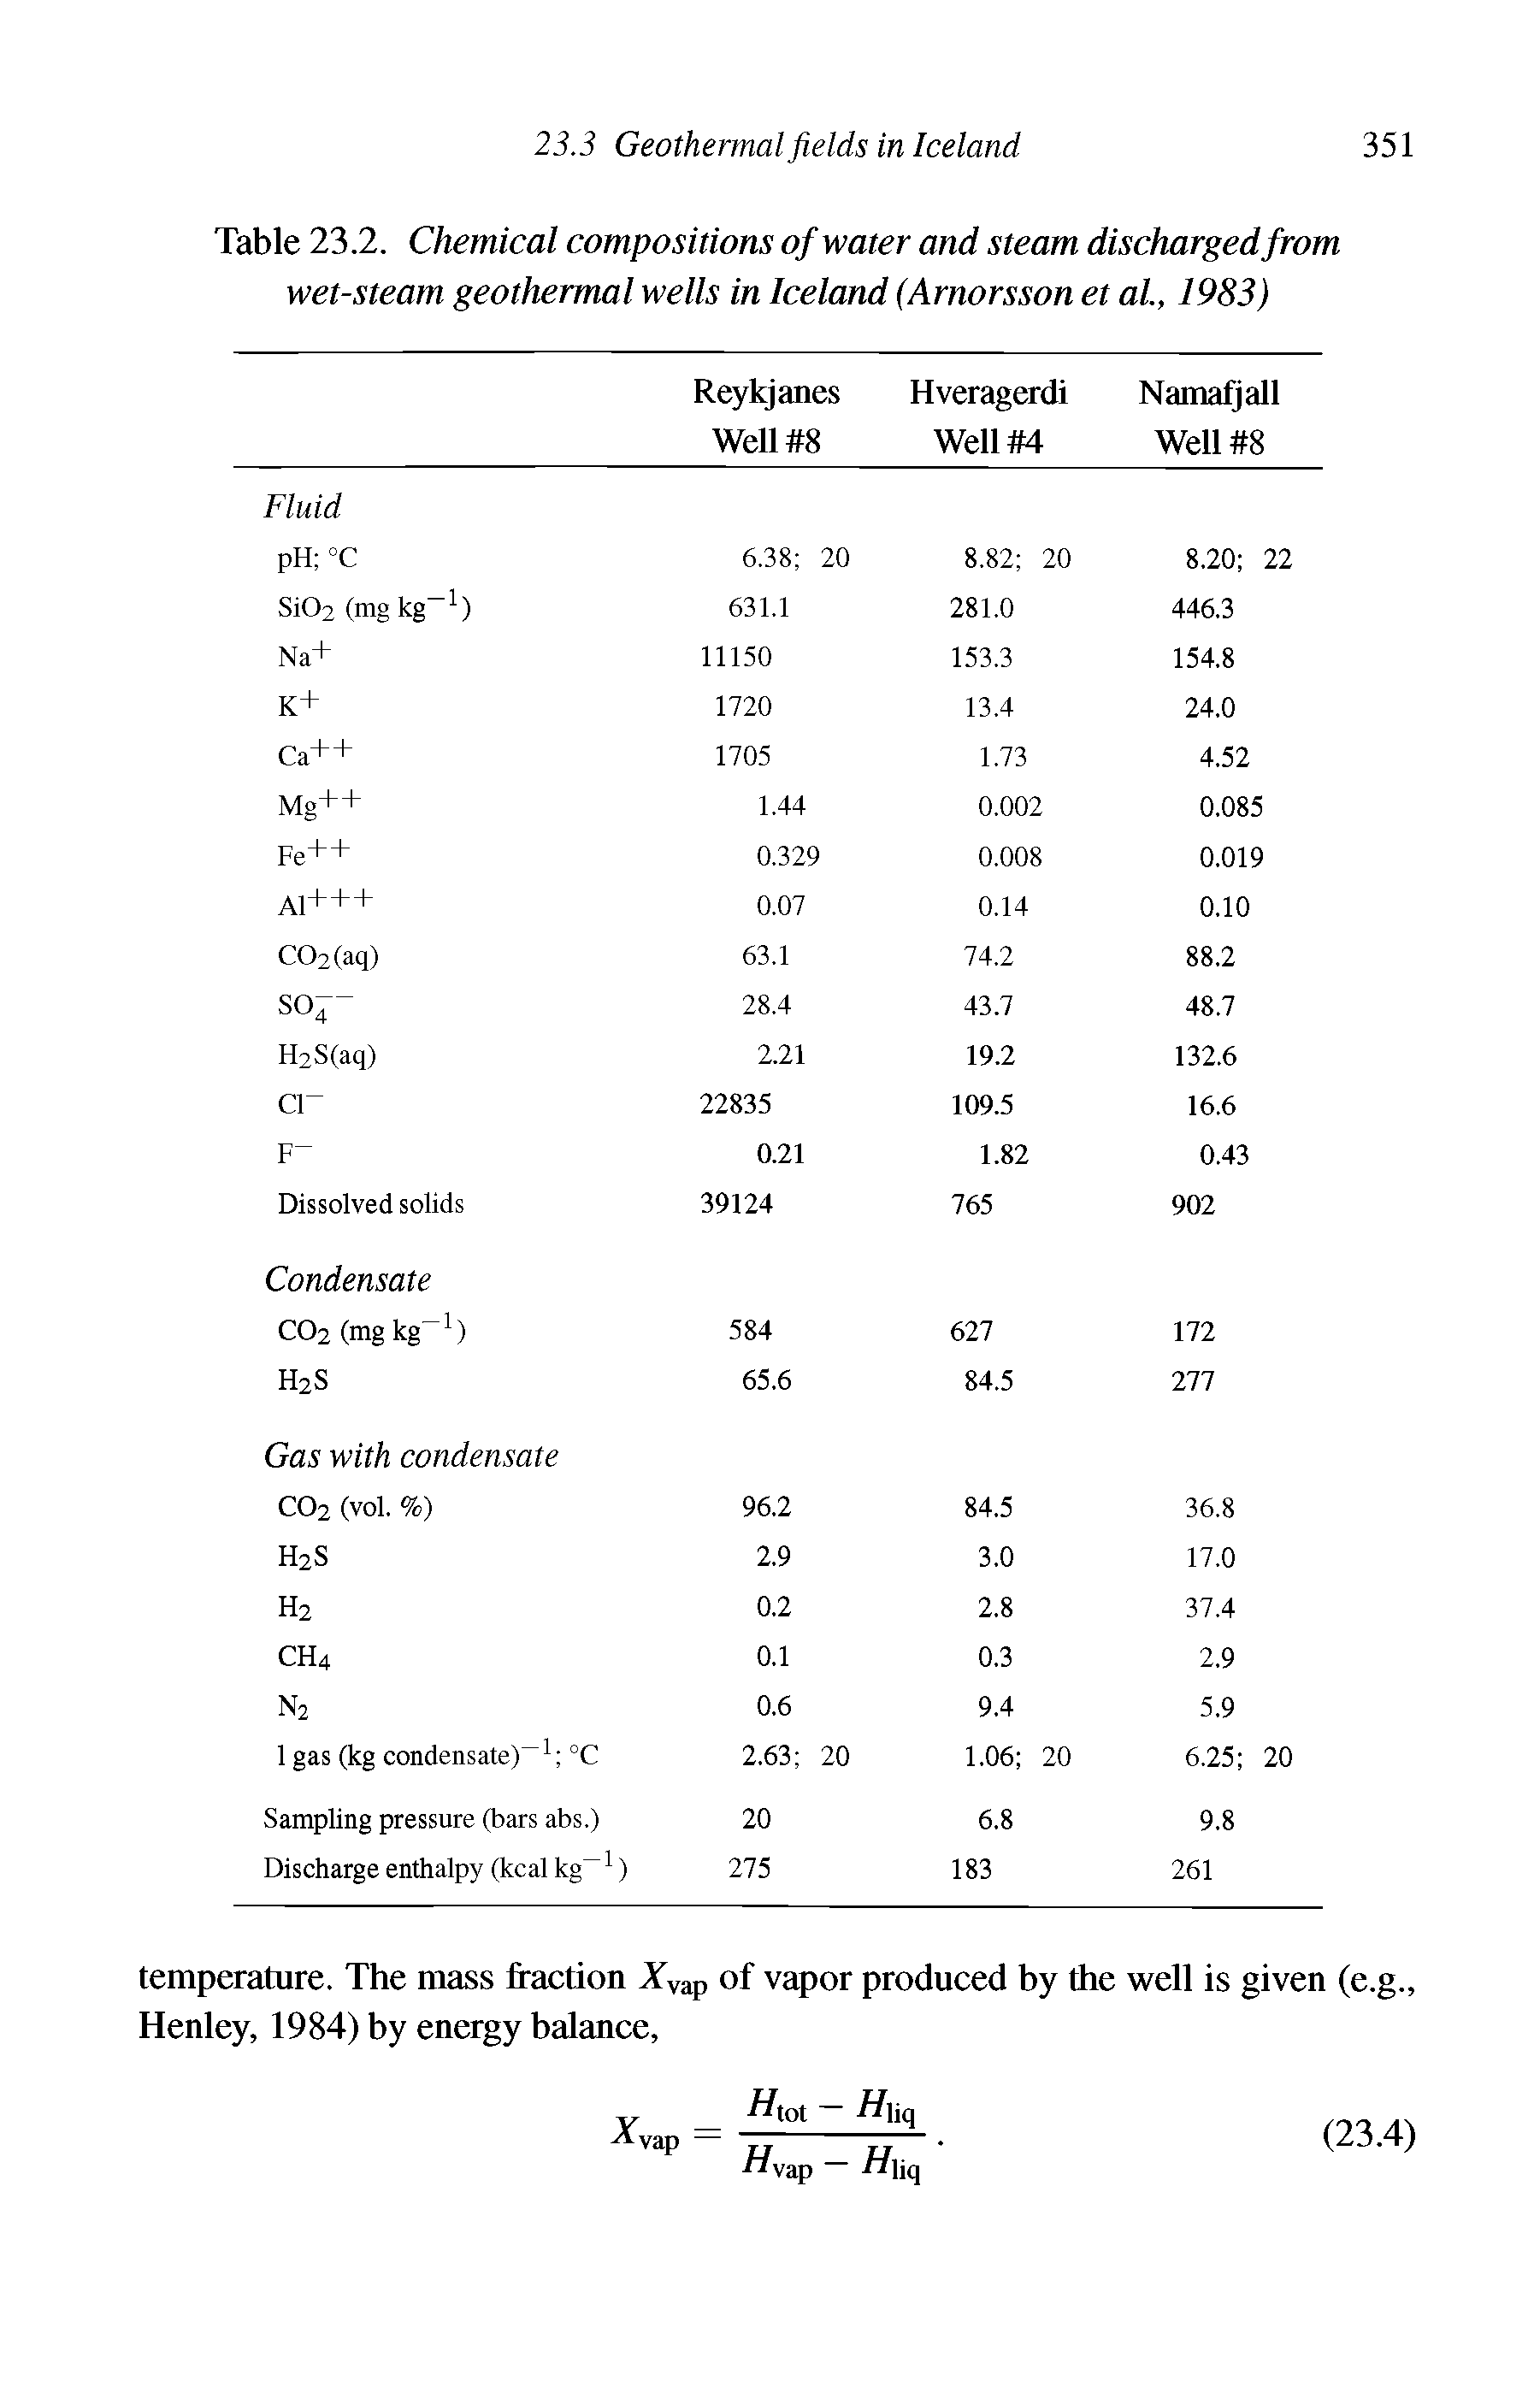 Table 23.2. Chemical compositions of water and steam discharged from wet-steam geothermal wells in Iceland (Arnorsson et al., 1983)...